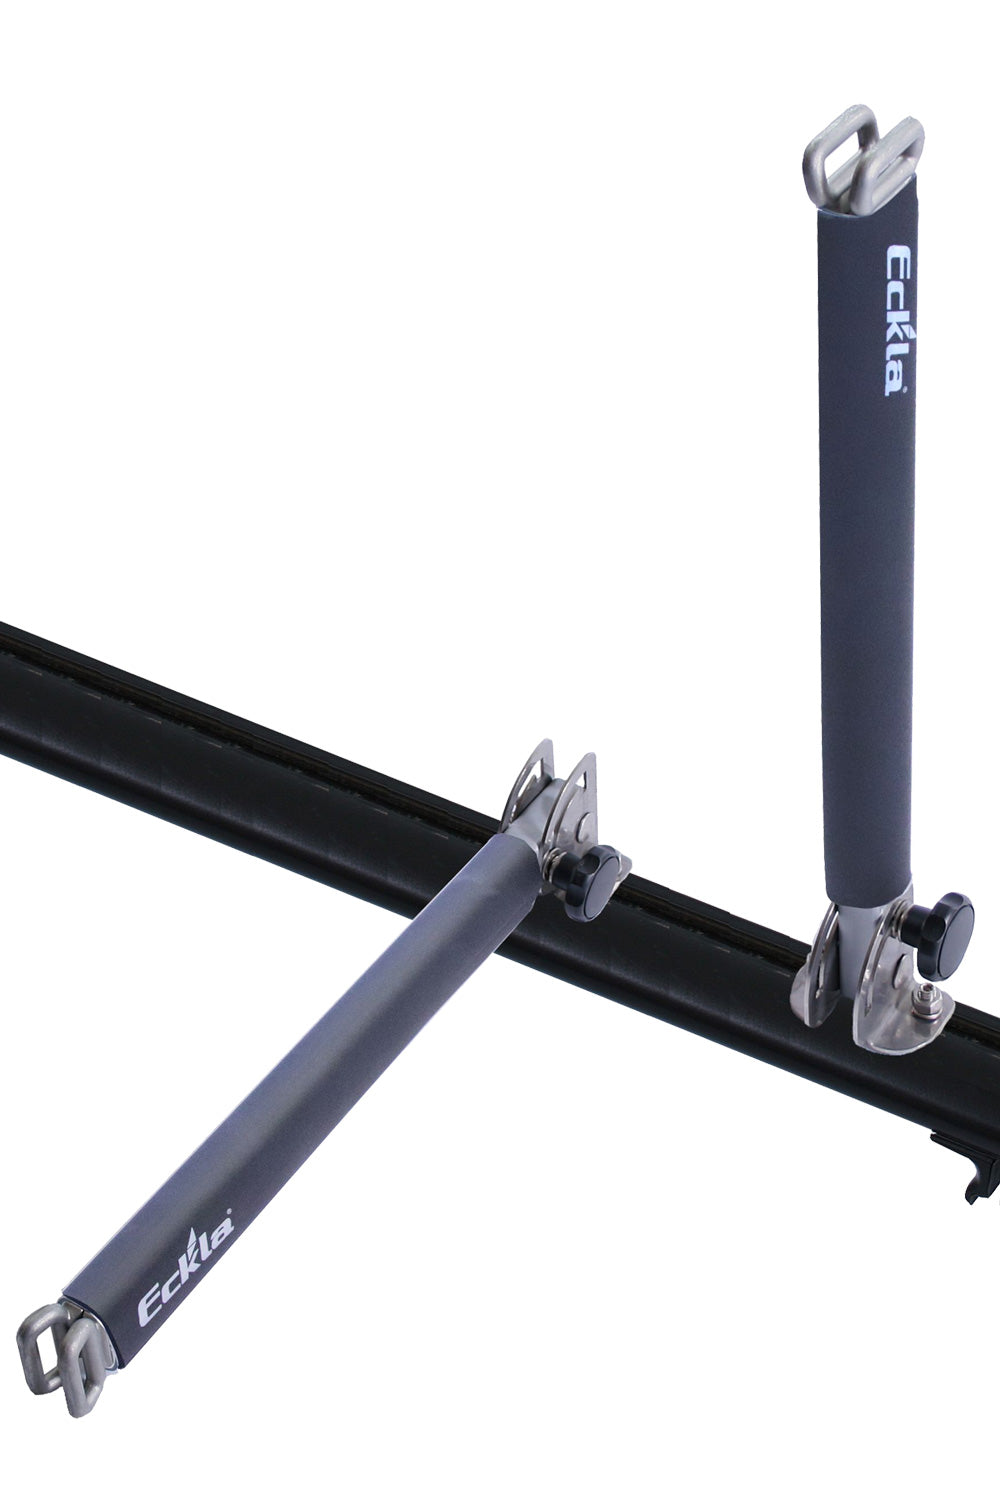 Eckla Folding Uprights shown vertically and horizontal with the t-track fitting